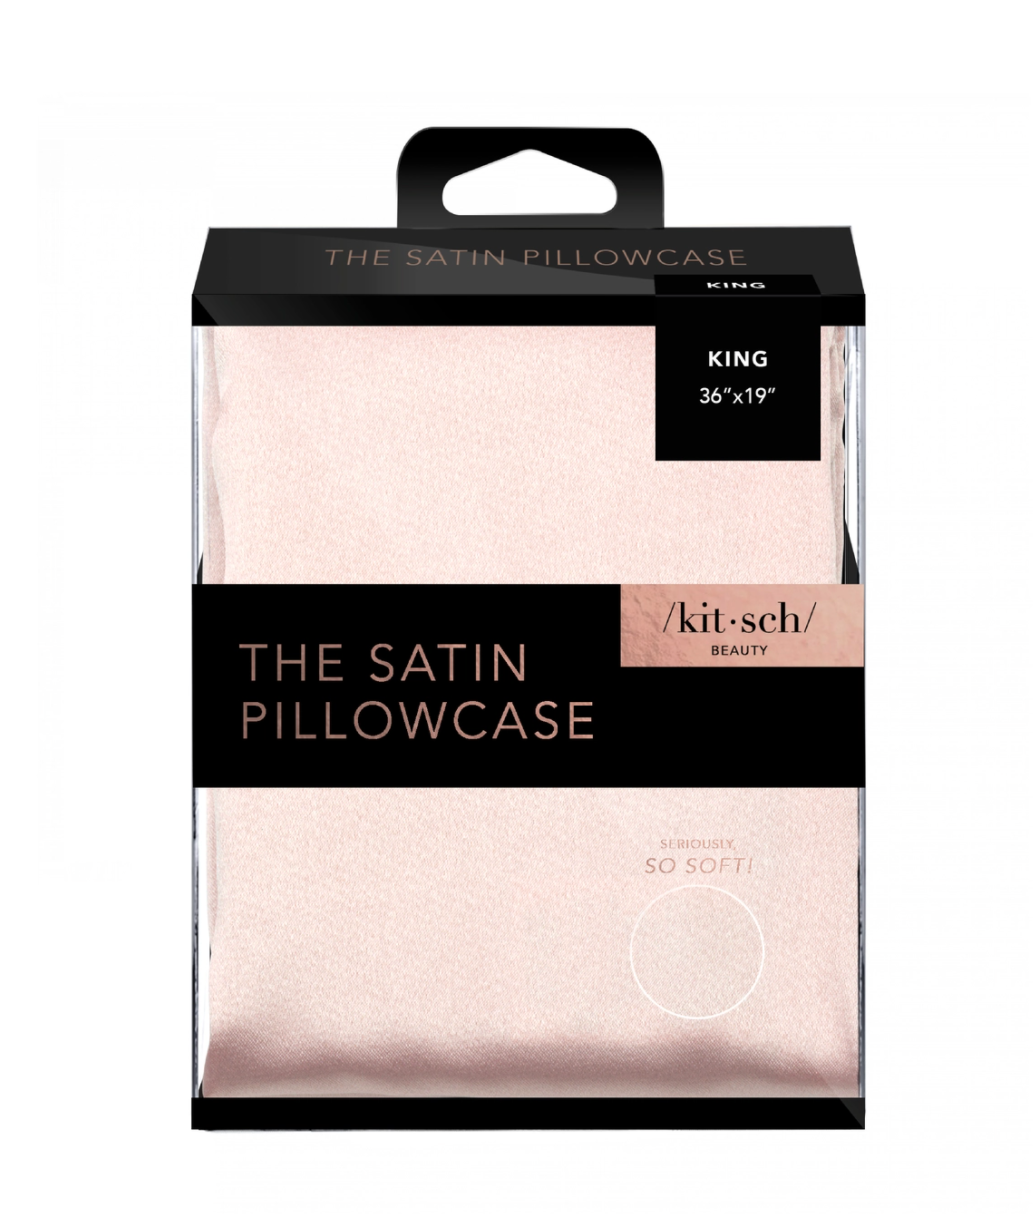 Satin Pillowcase - Several Colors Available